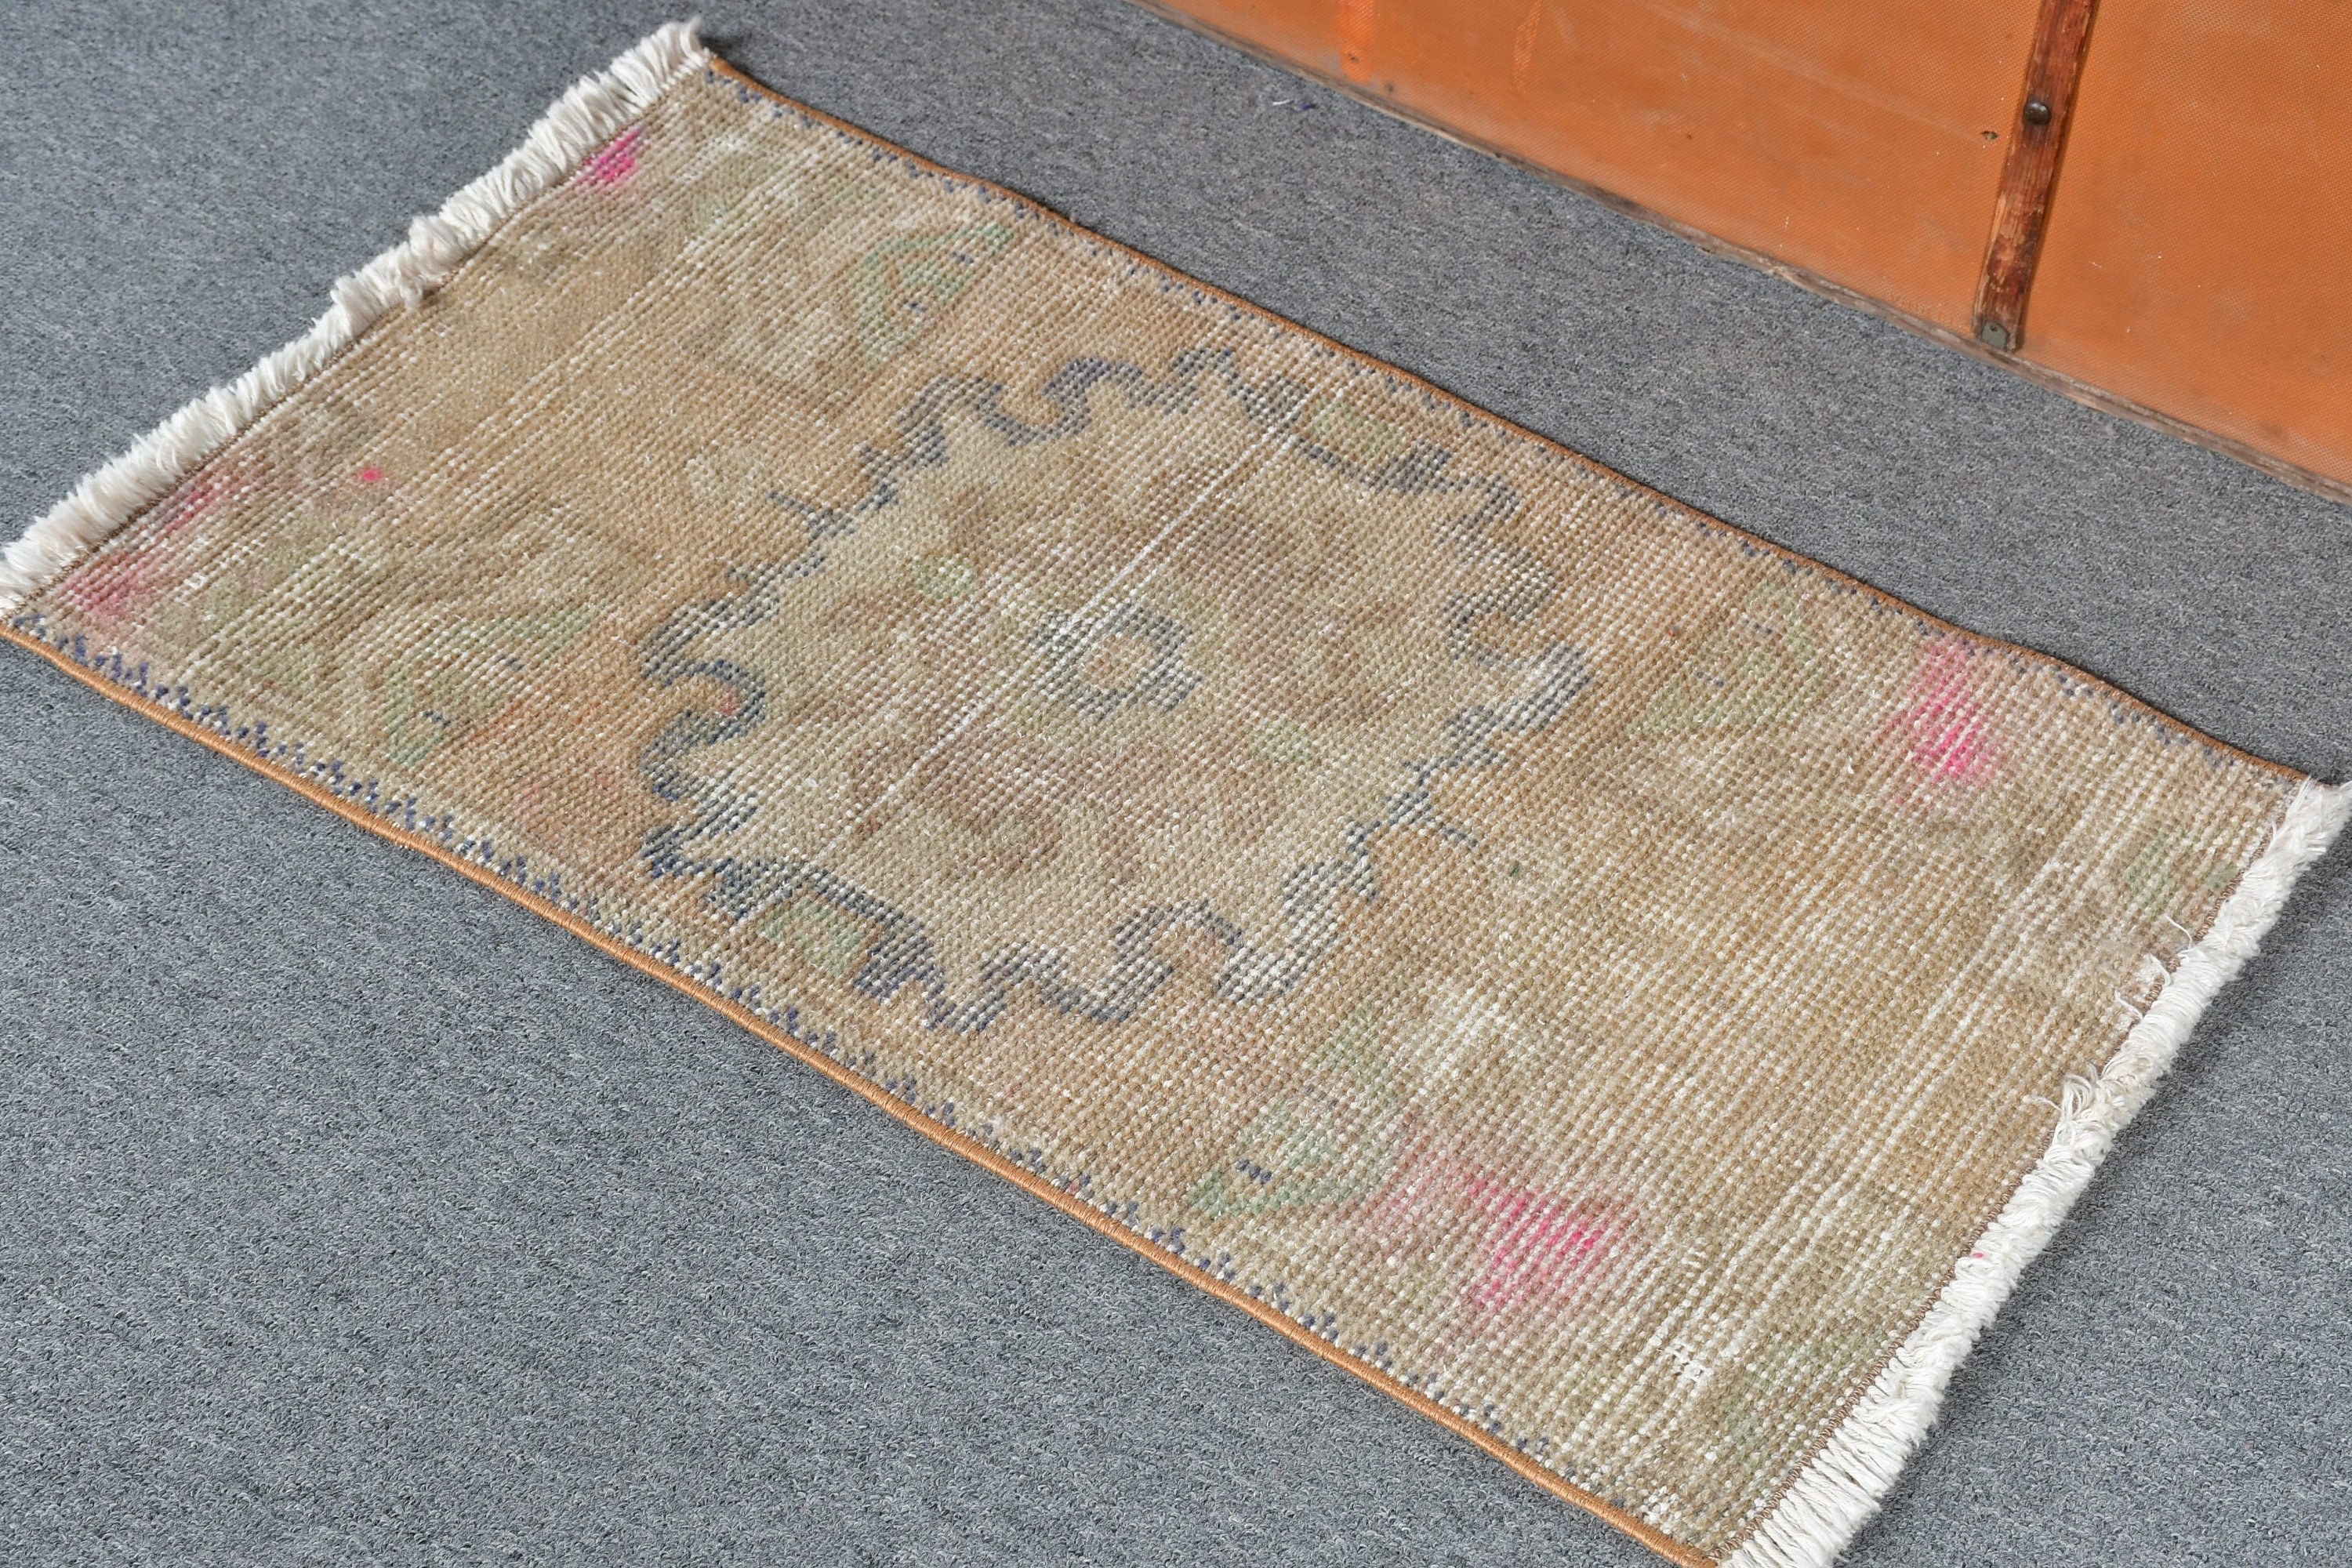 Vintage Rug, Bath Rugs, Turkish Rug, Rugs for Bedroom, Kitchen Rugs, Brown Oushak Rug, Home Decor Rugs, Oushak Rug, 1.6x2.6 ft Small Rug